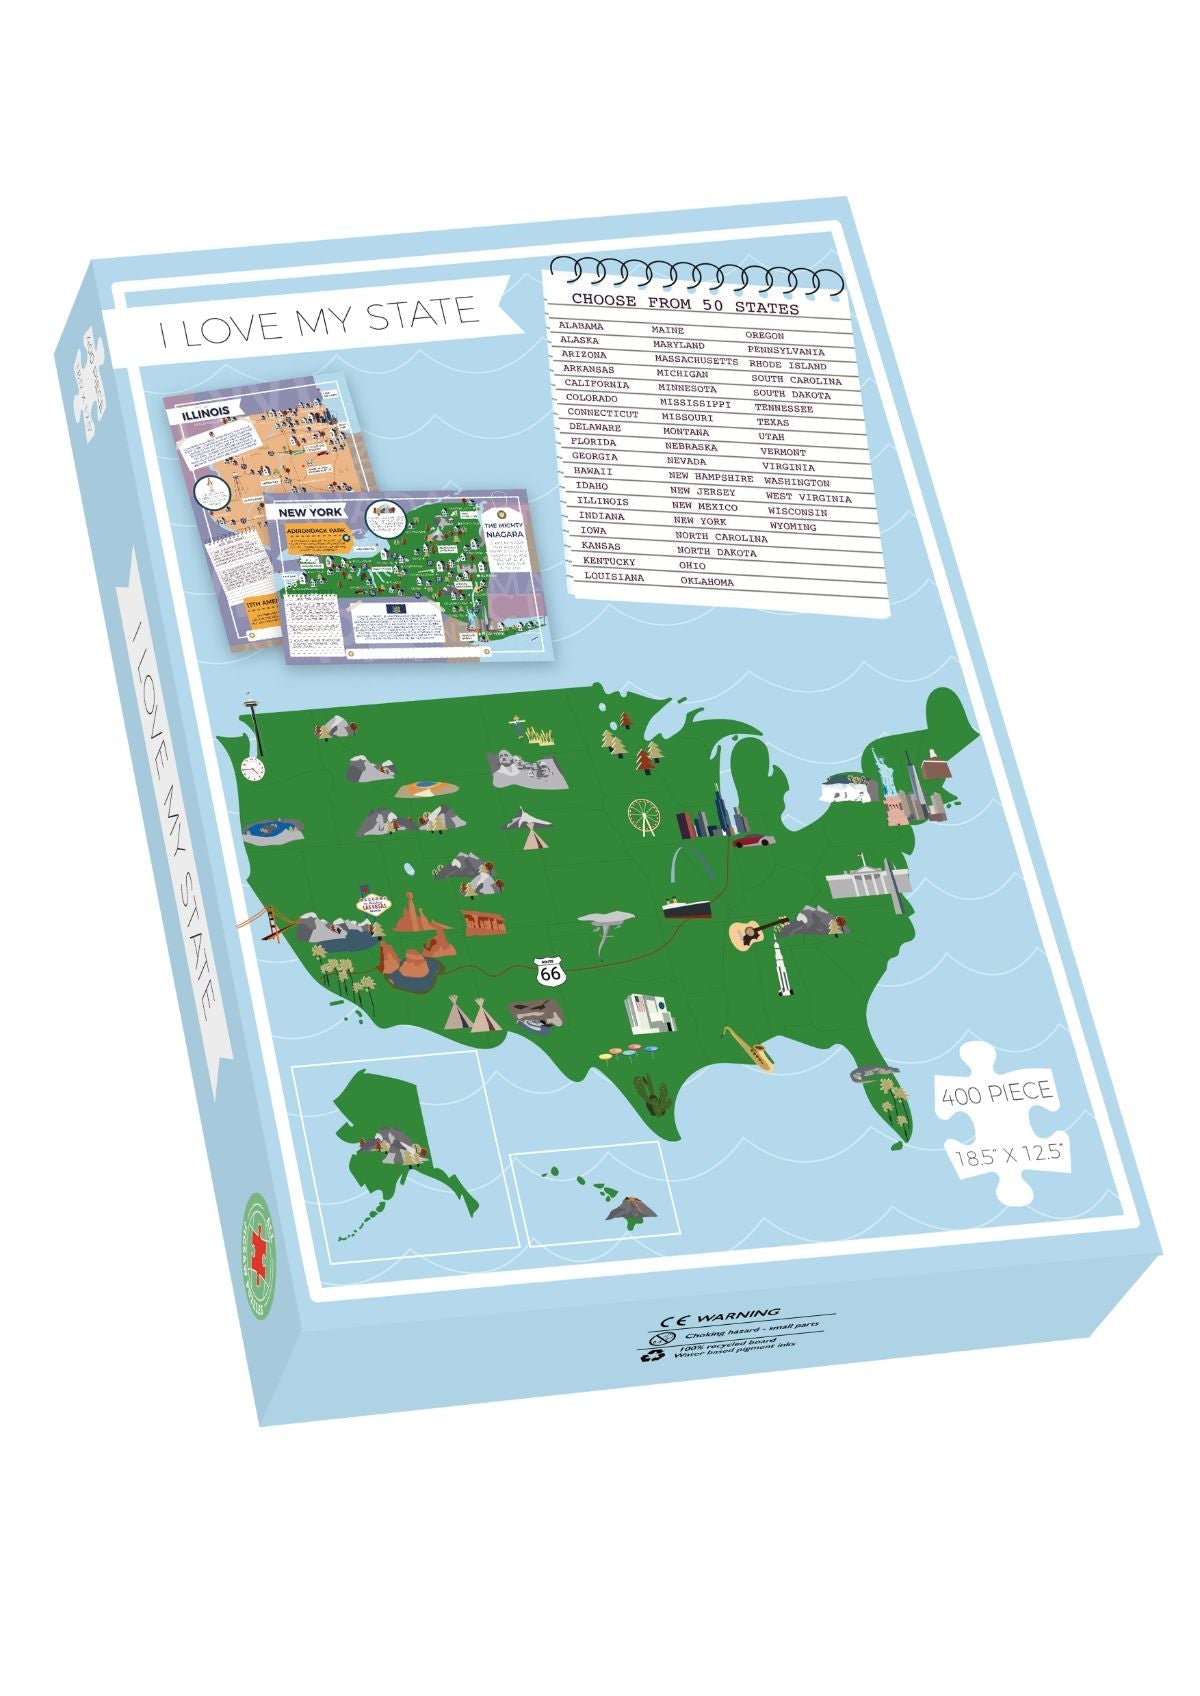 California - I Love My State 400 Piece Personalized Jigsaw Puzzle